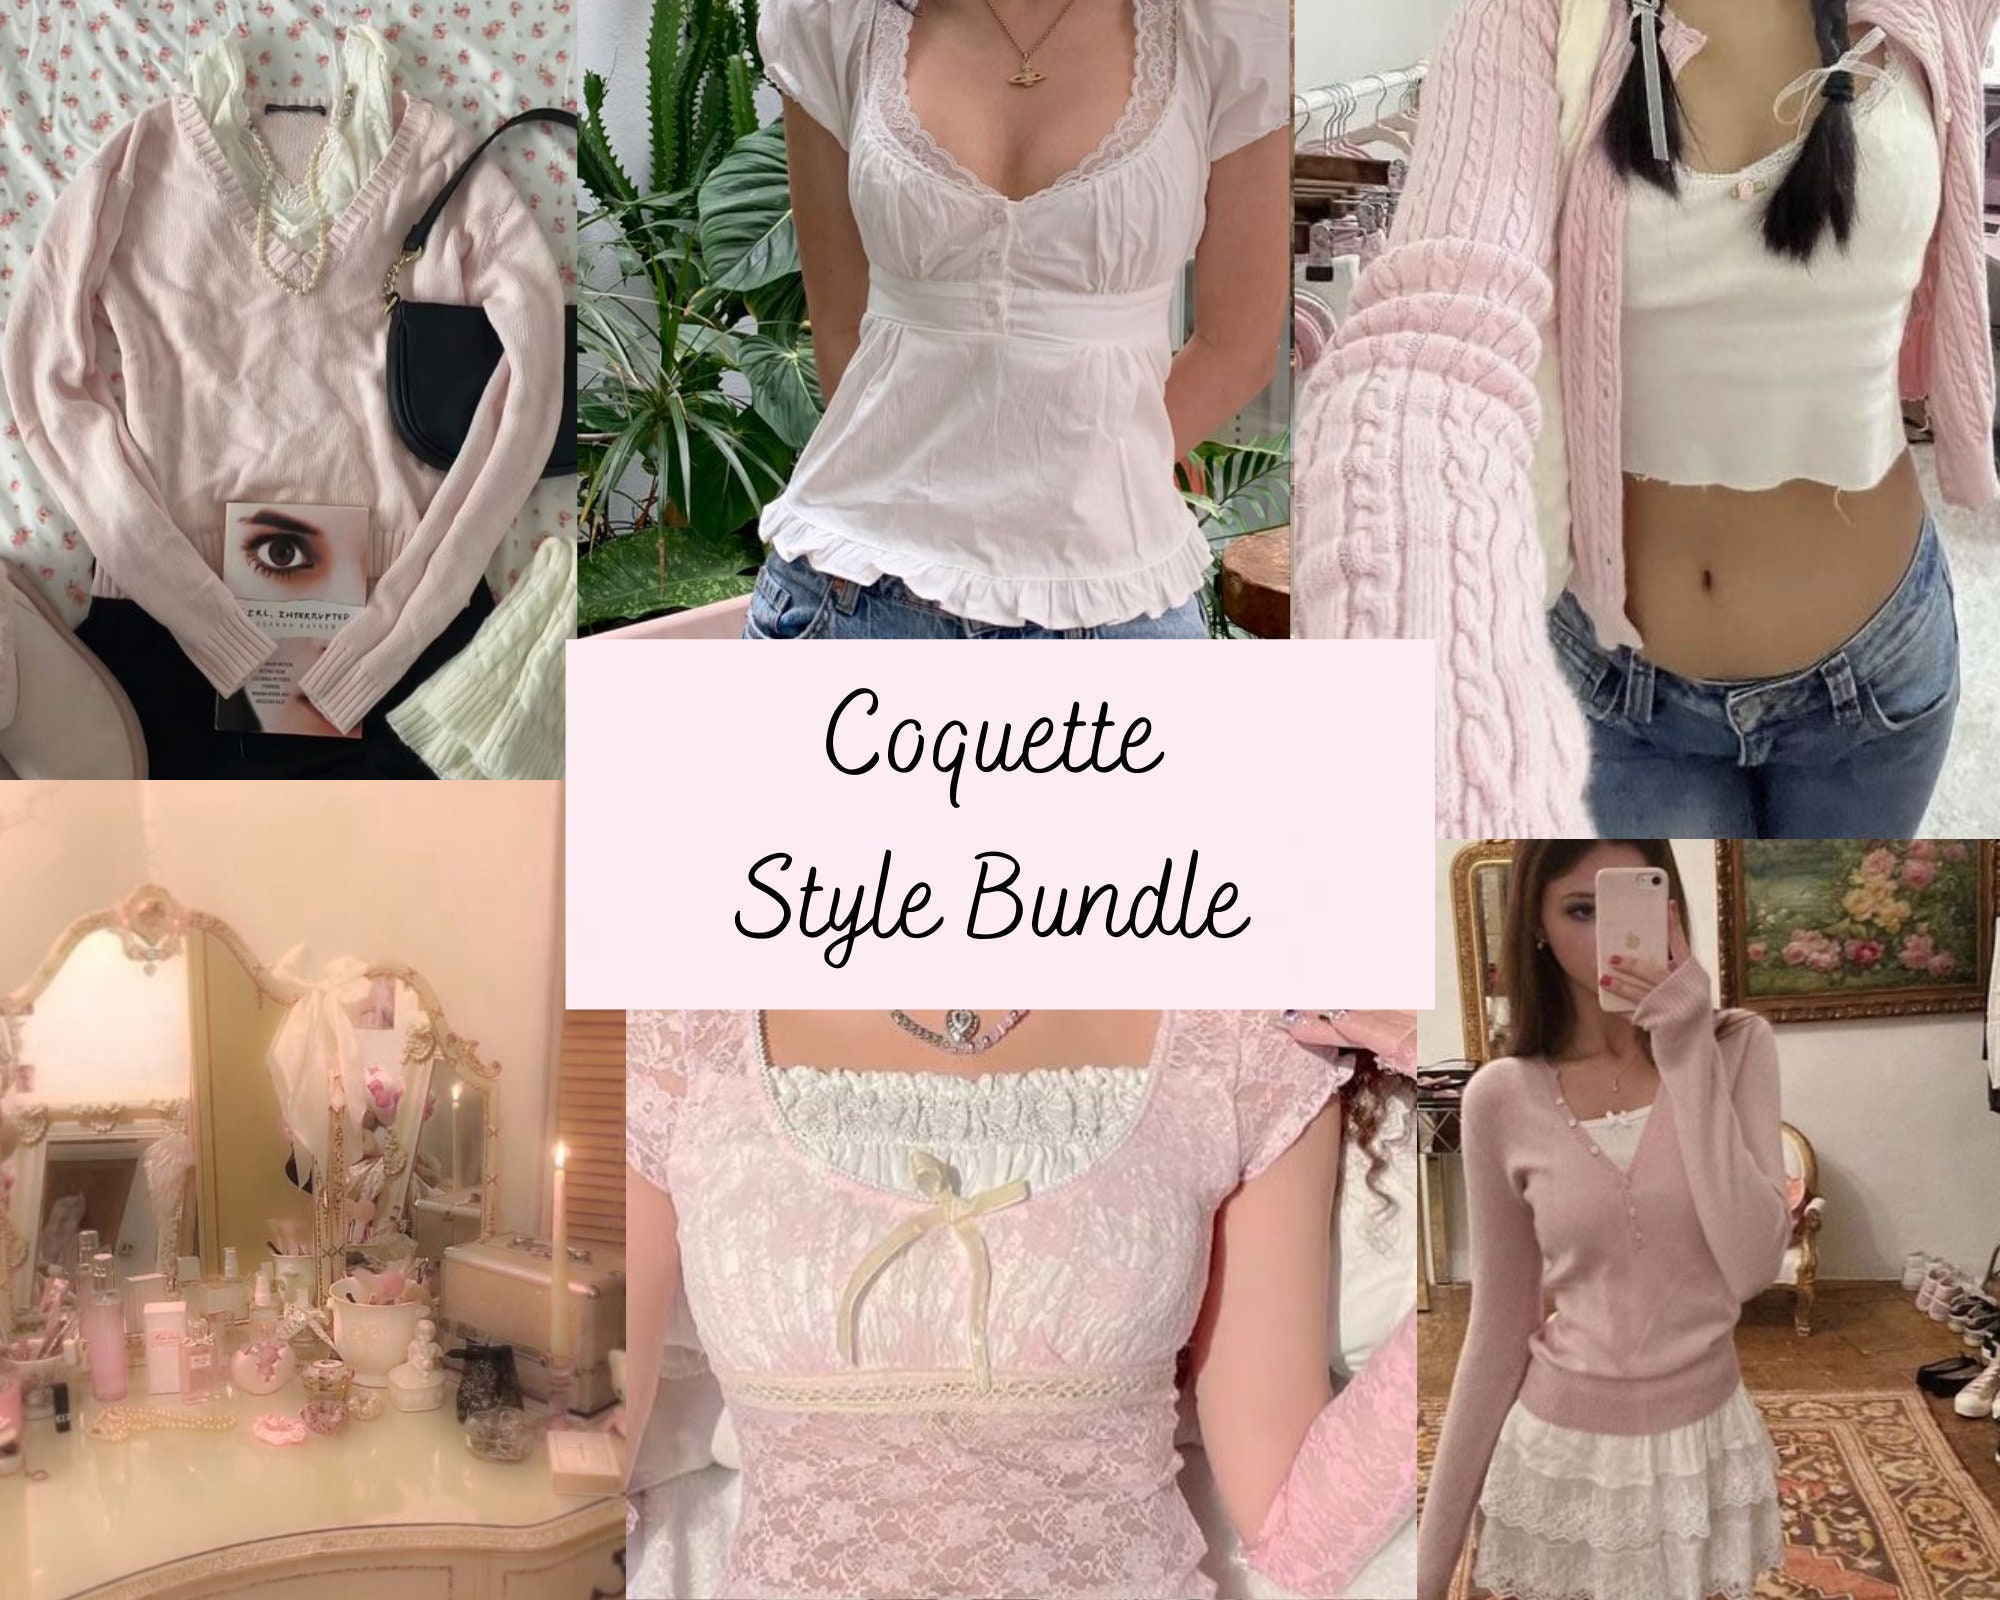 Coquette Style Bundle Aesthetic Clothing Mystery Box -  Canada